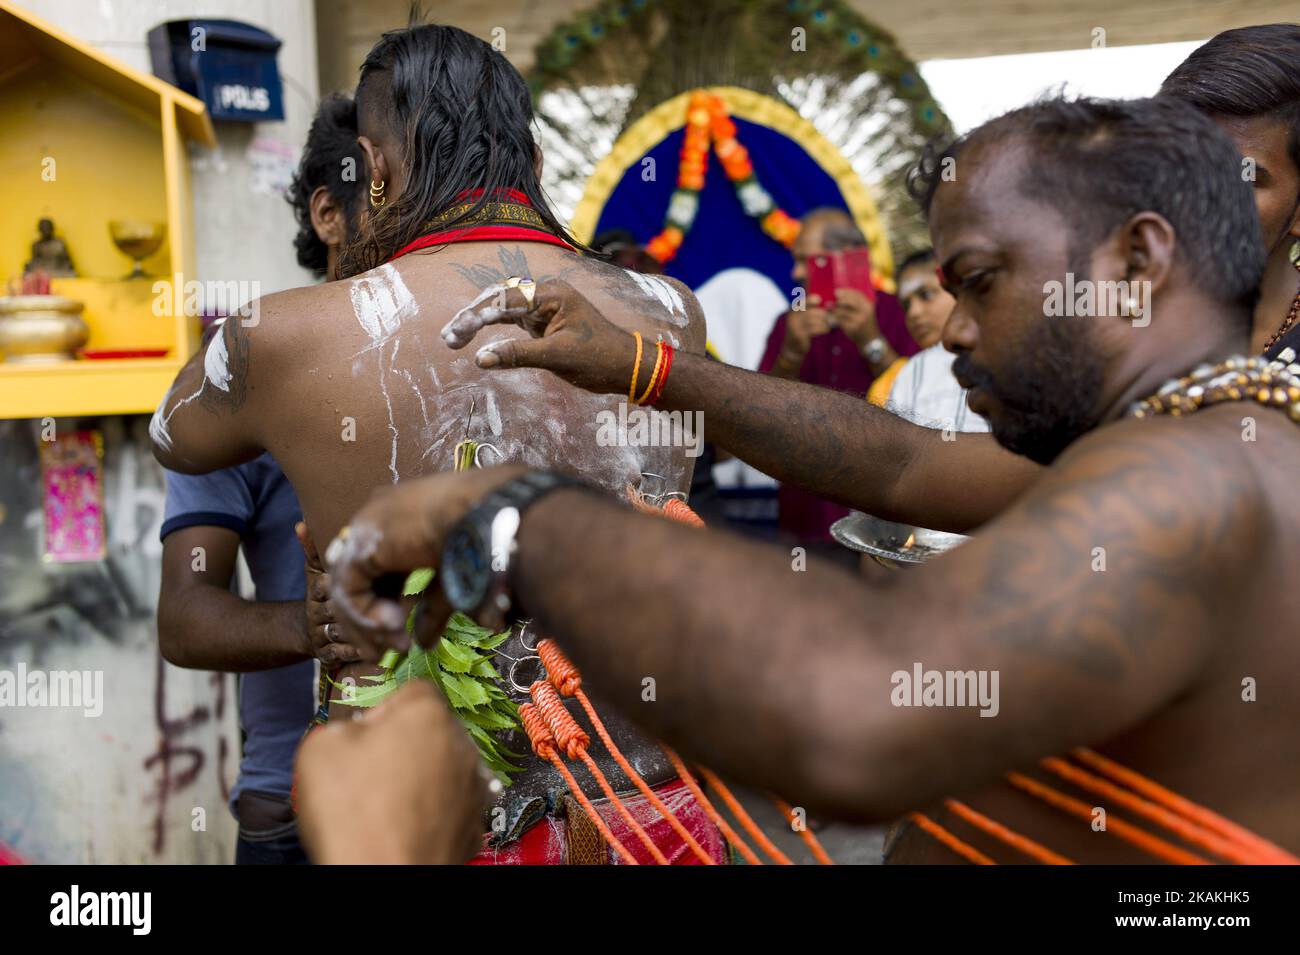 Tamilians sharply pierced with an iron beak sharply while celebrating Thaipusam festival in Batu caves on February 04, 2017 in Kuala Lumpur, Malaysia. Thaipusam is a Hindu festival celebrated mostly by the Tamil community on the full moon in the Tamil Thai month during January or February to commemorates the occasion when Parvati gave Murugan a 'spear' so he could vanquish the evil demon Soorapadman. This is particularly noticeable in countries where there is a significant presence of Tamil society like India, Sri Lanka, Malaysia, Mauritius, Singapore, South Africa, Guadalupe, Reunion, Indones Stock Photo